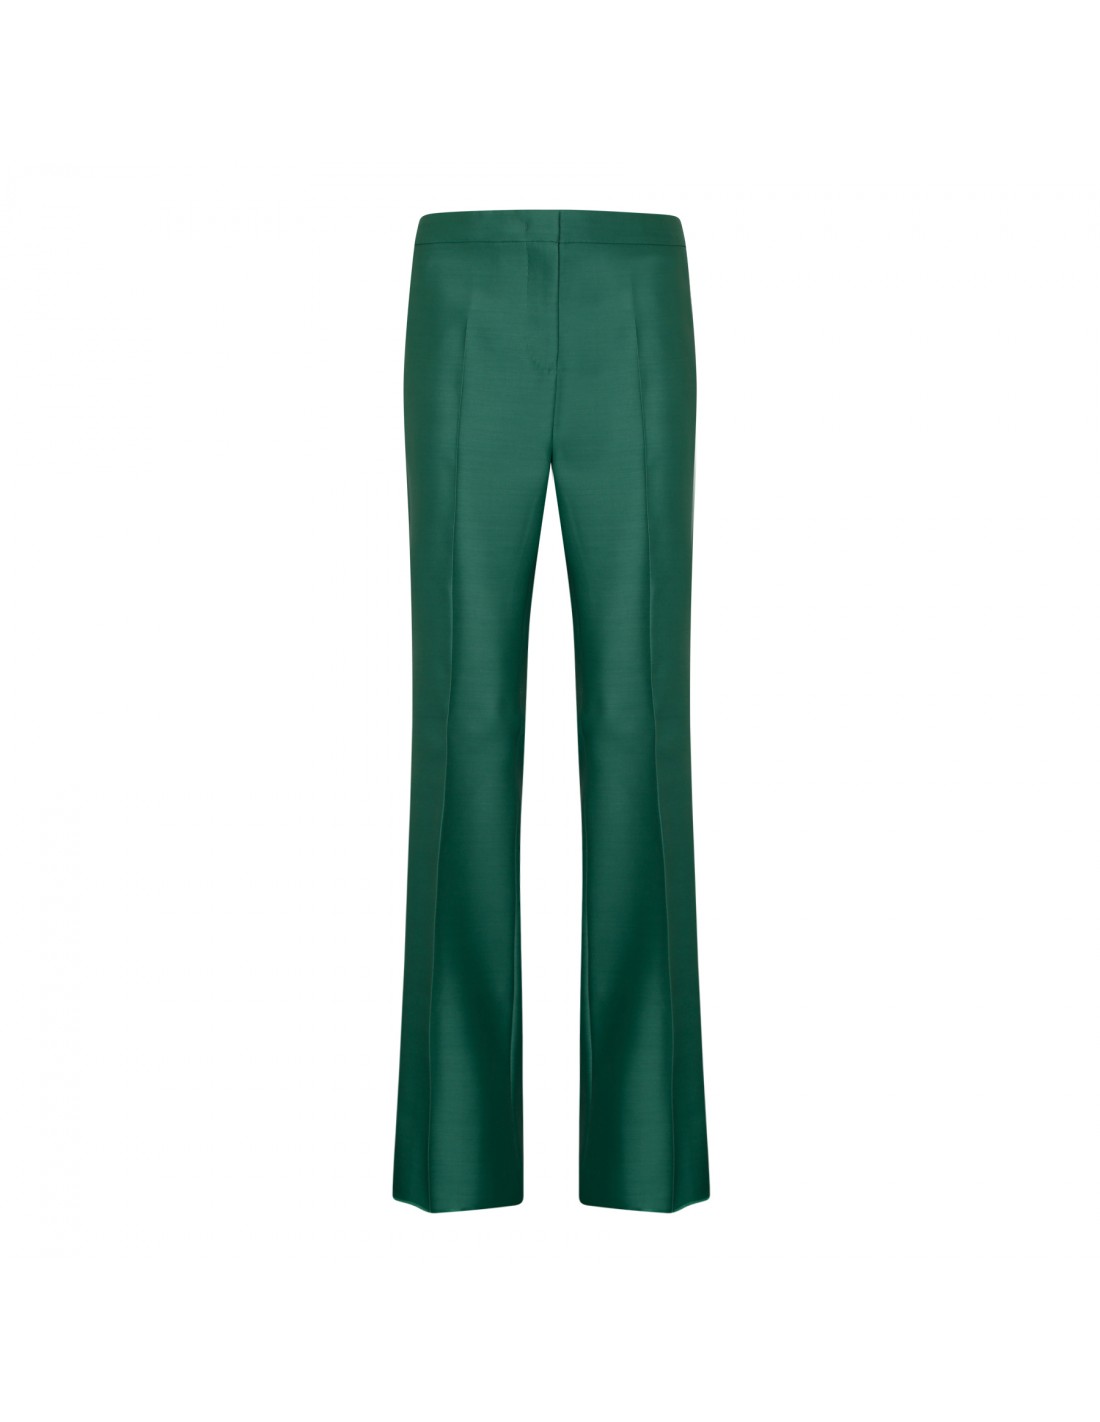 Wool and silk double-fabric pants